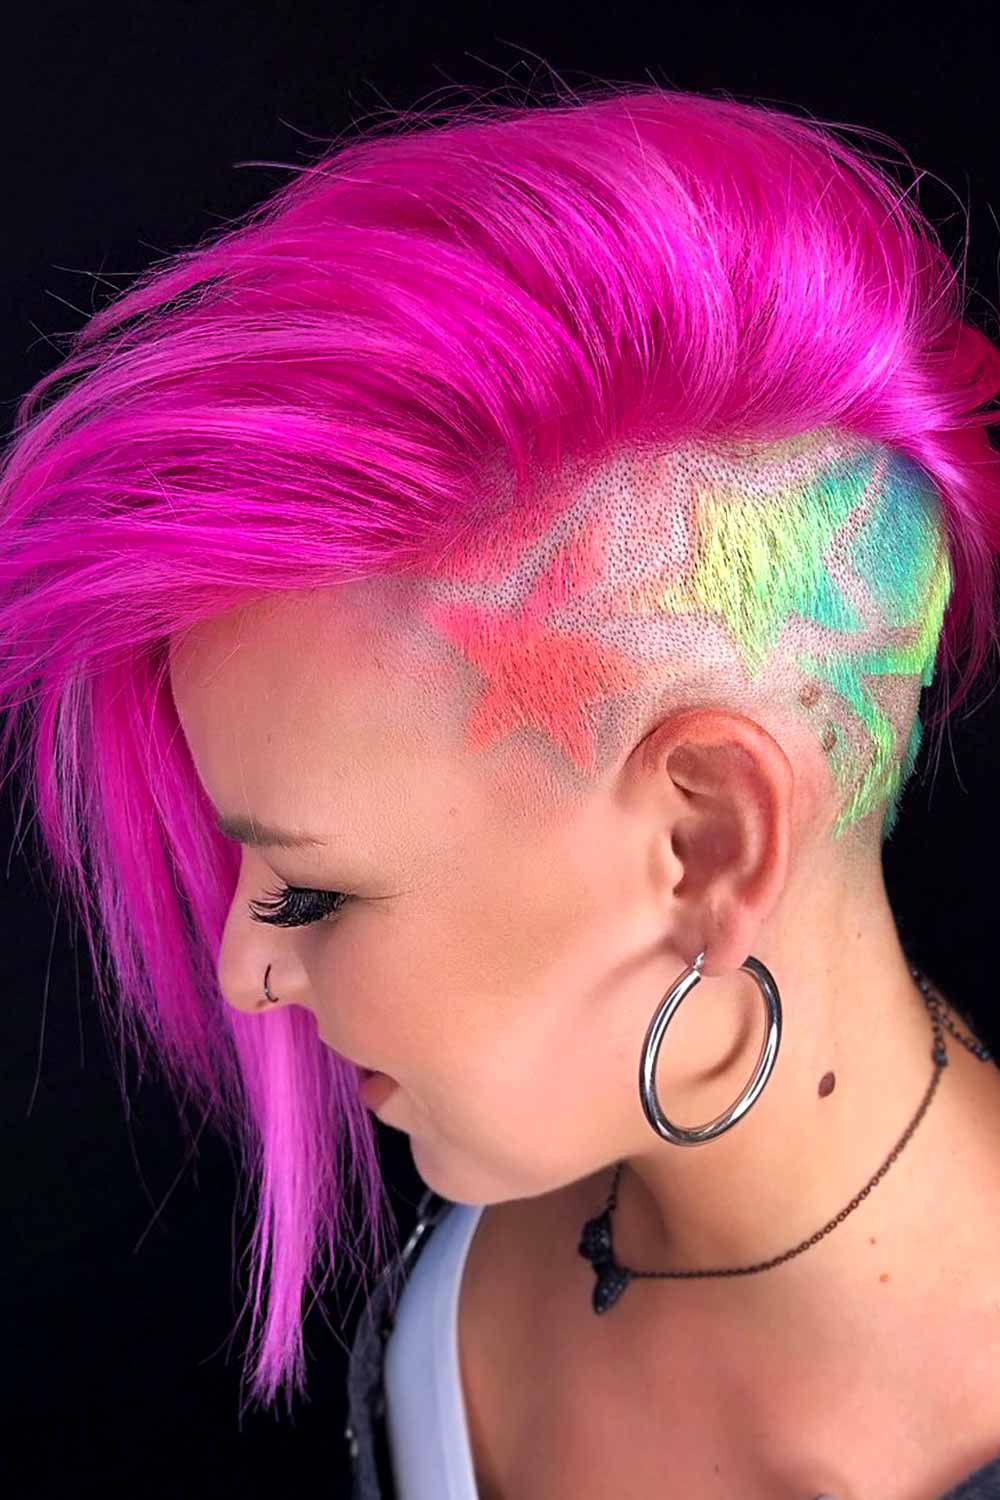 Lovely And Beautiful Hairstyle Tattoos #undercuthairstyles #undercutwomen